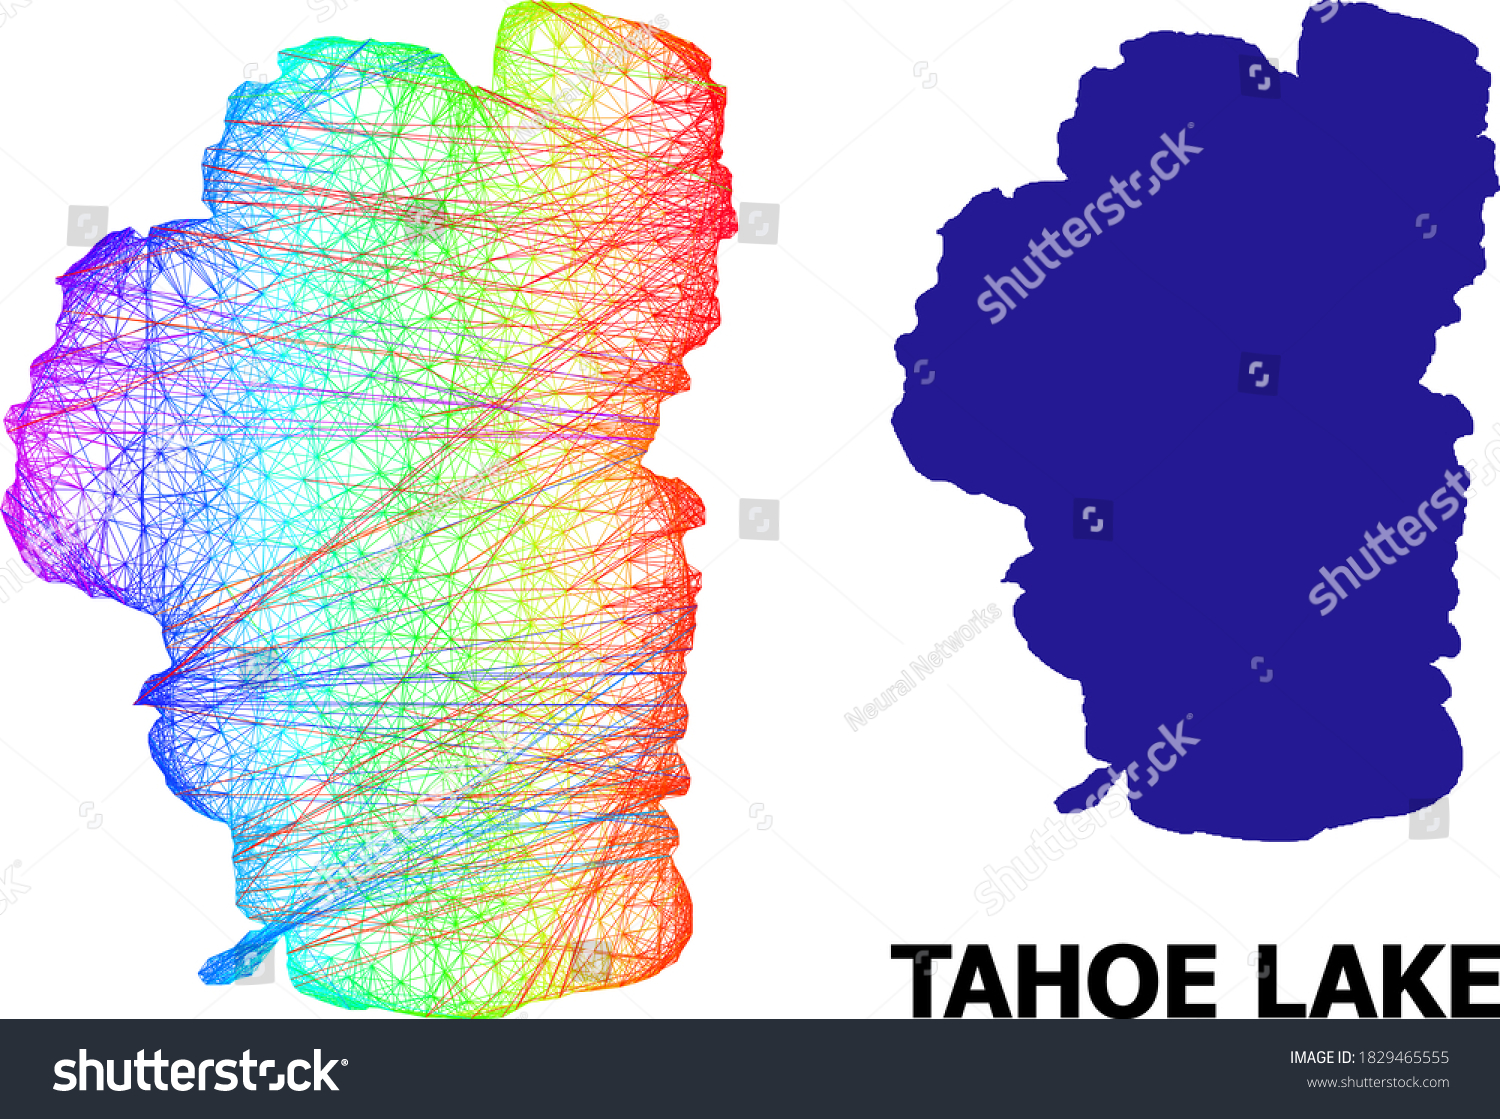 SVG of Wire frame and solid map of Tahoe Lake. Vector model is created from map of Tahoe Lake with intersected random lines, and has spectrum gradient. Abstract lines are combined into map of Tahoe Lake. svg